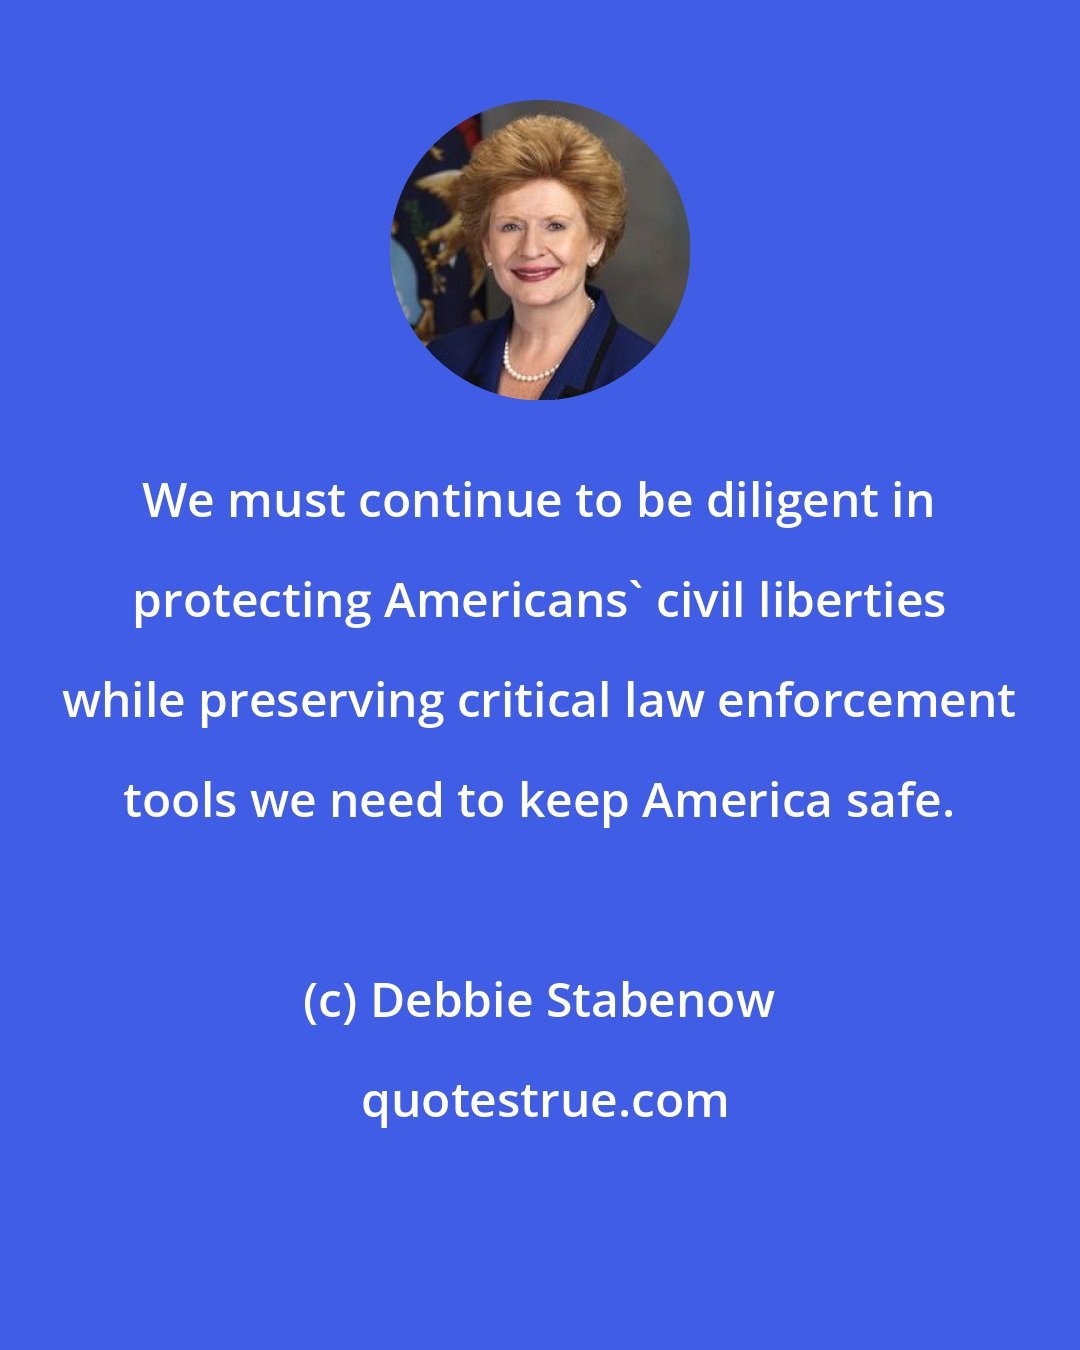 Debbie Stabenow: We must continue to be diligent in protecting Americans' civil liberties while preserving critical law enforcement tools we need to keep America safe.